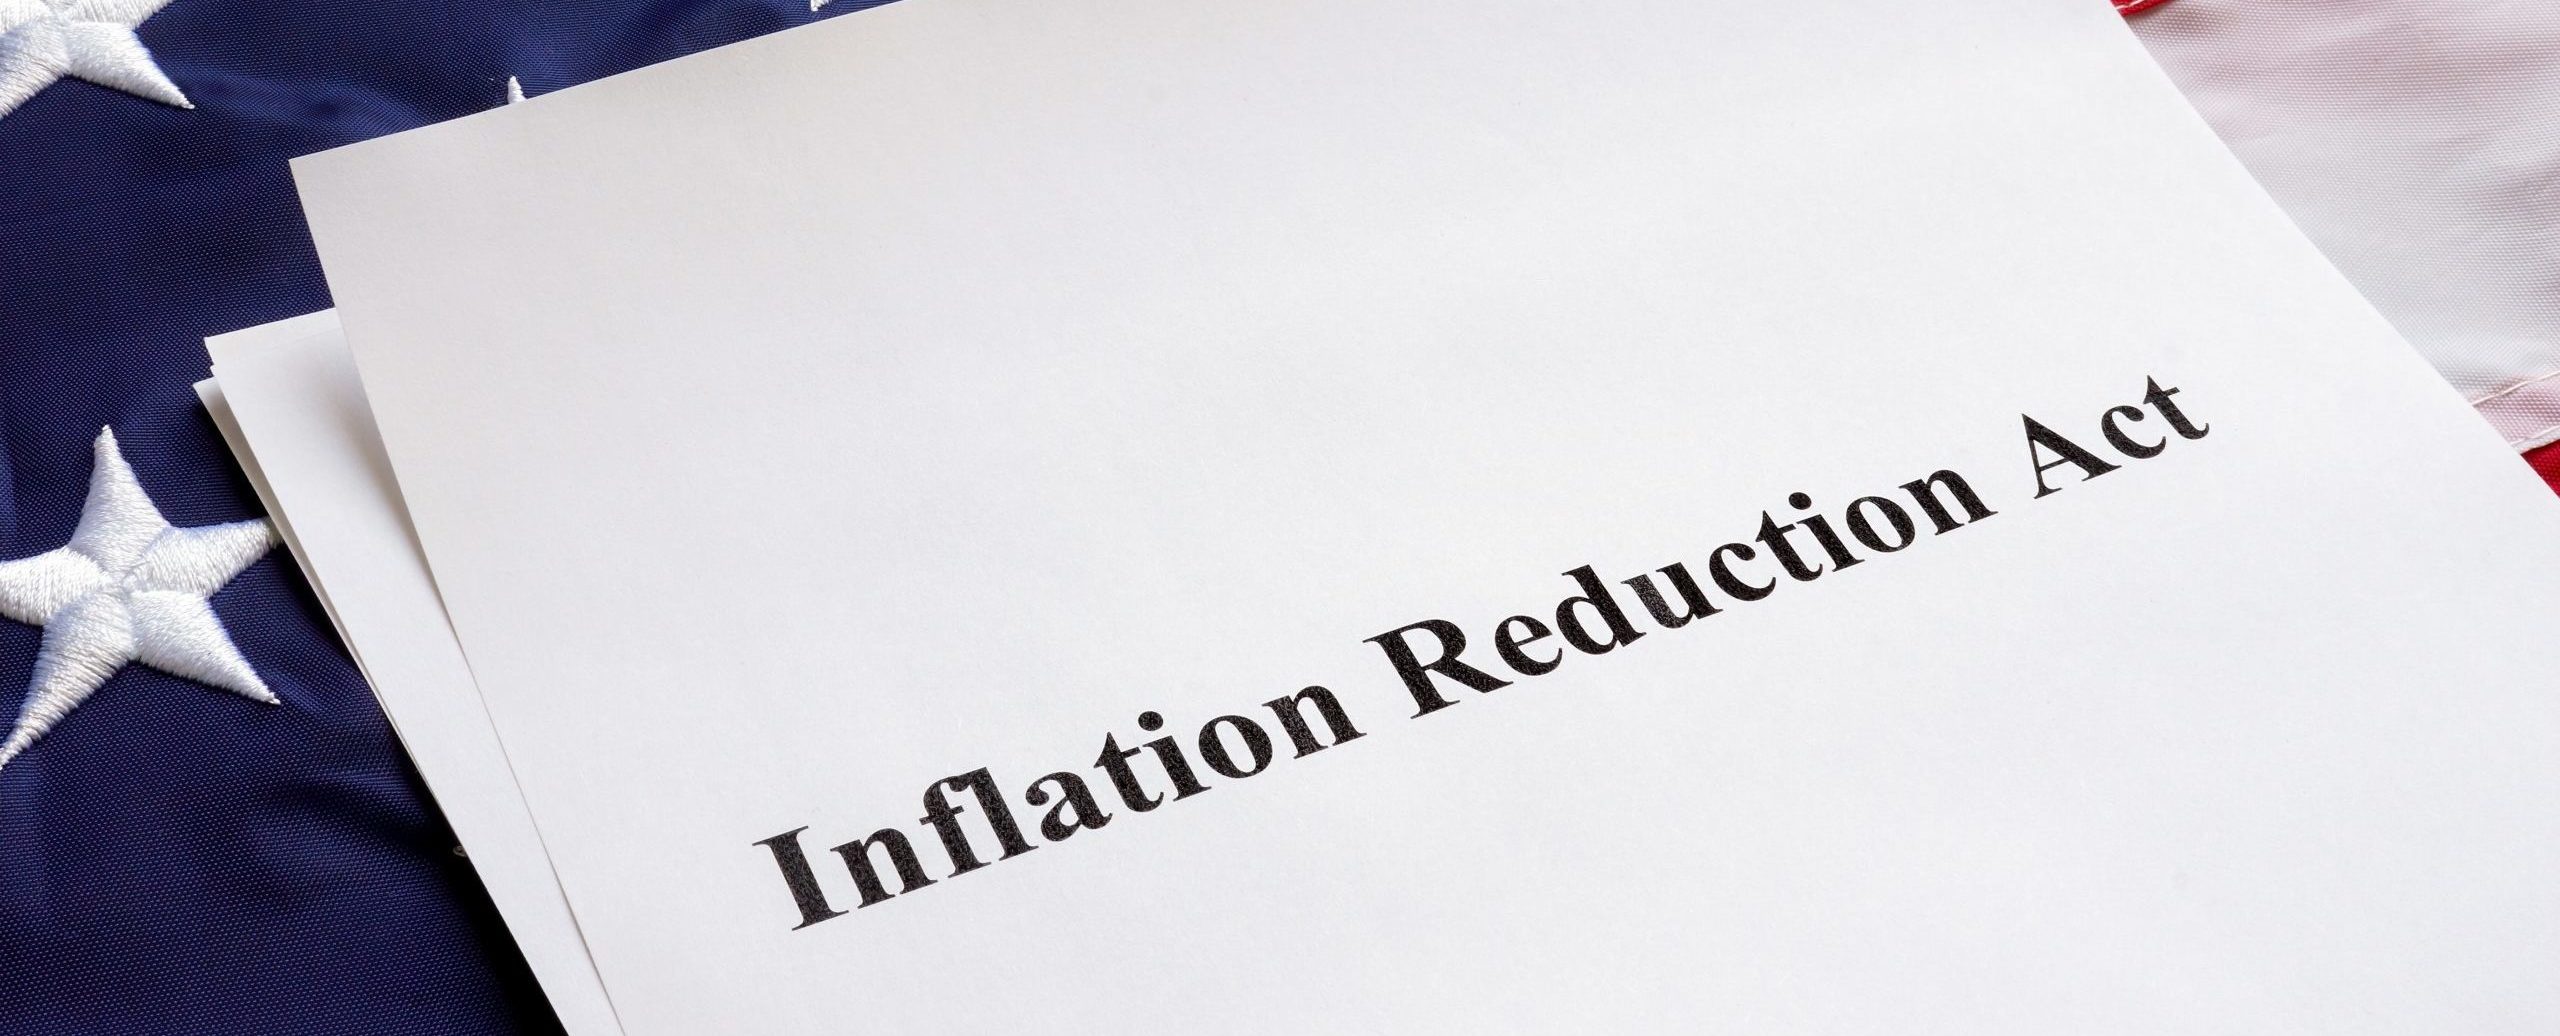 inflation-reduction-act-signed-by-president-biden-national-health-council